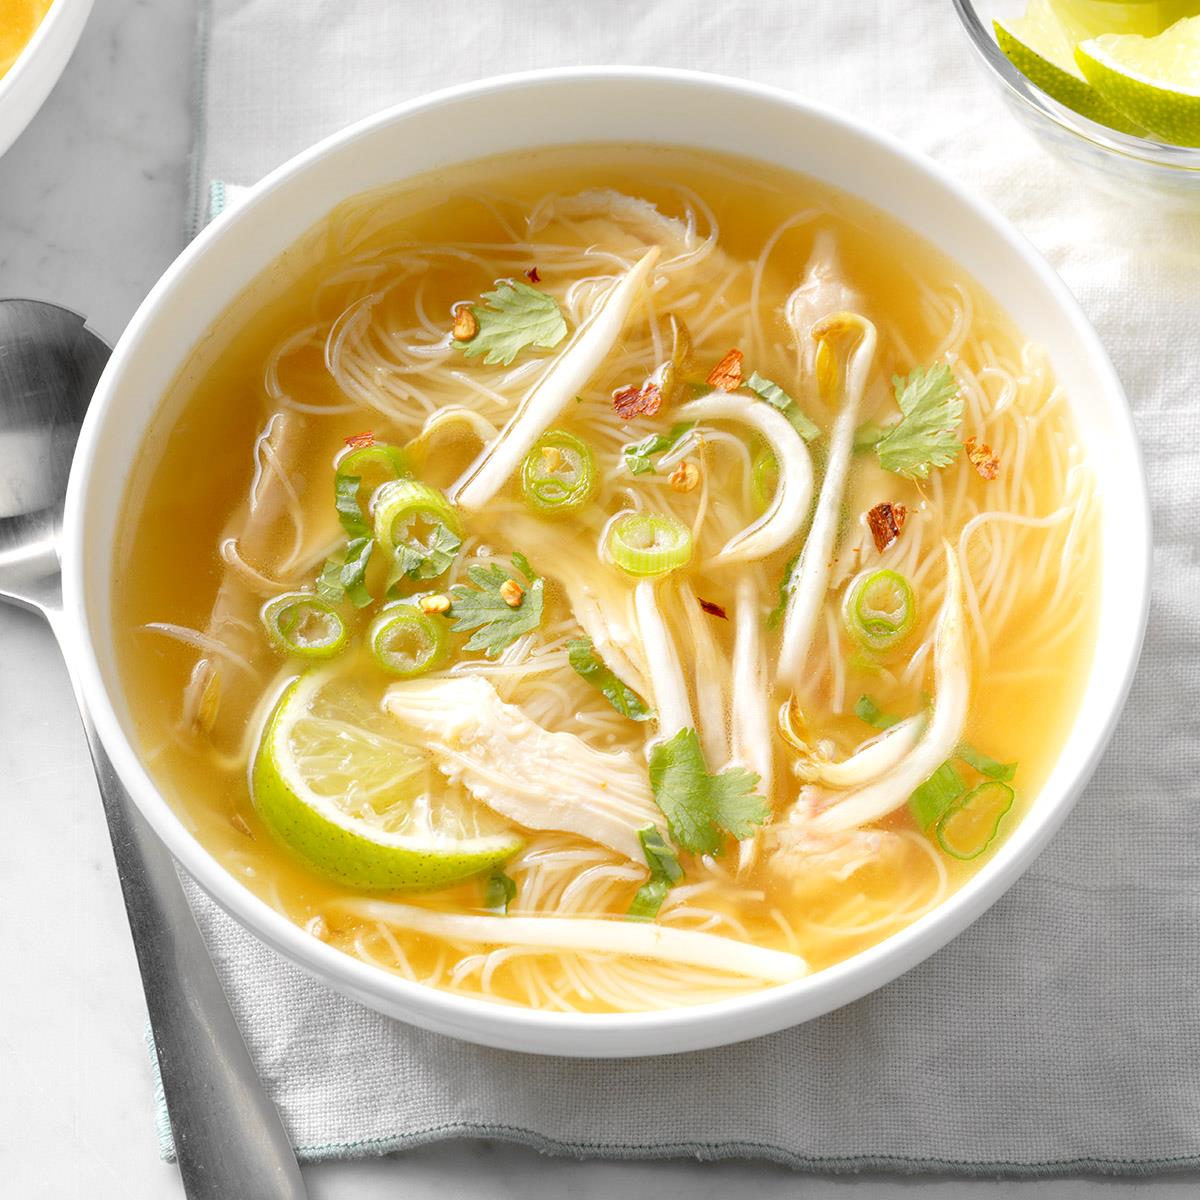 Thai Chicken Noodle Soup Recipe Taste Of Home,Domesticated Fox Curly Tail